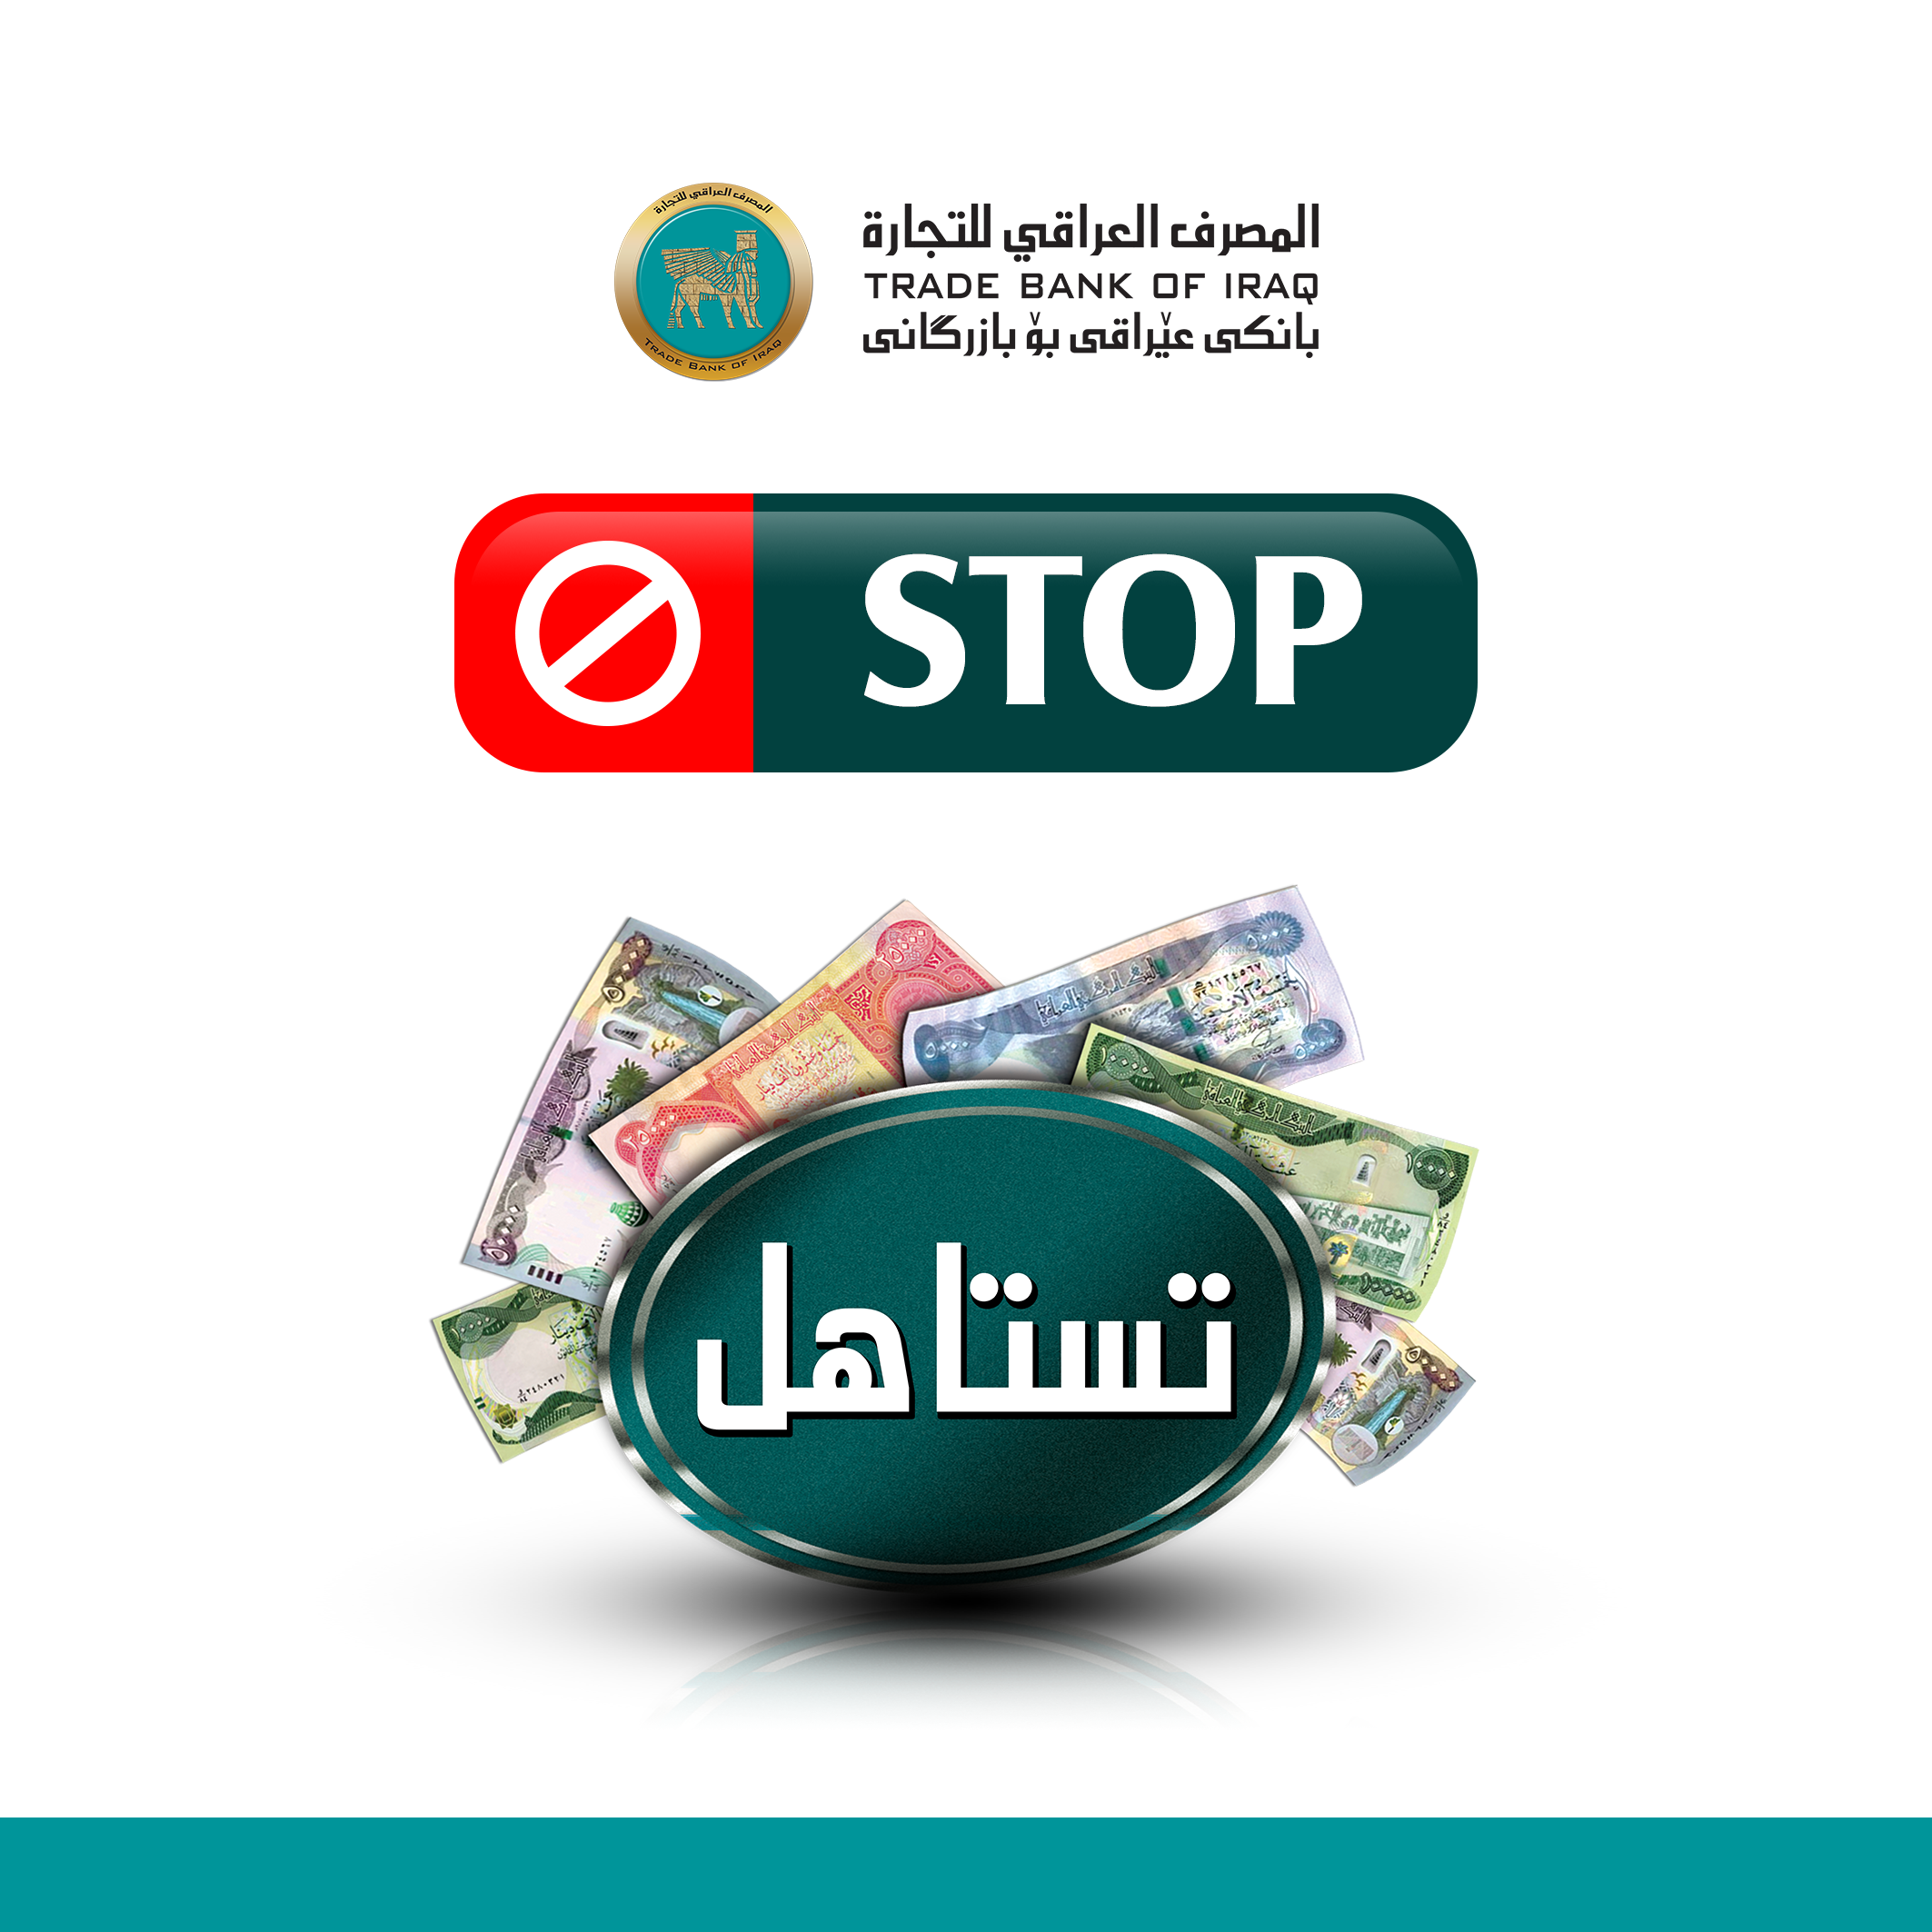 We are informing you that TESTAHEL Dinar product has been discontinued and we shall announce if resumed